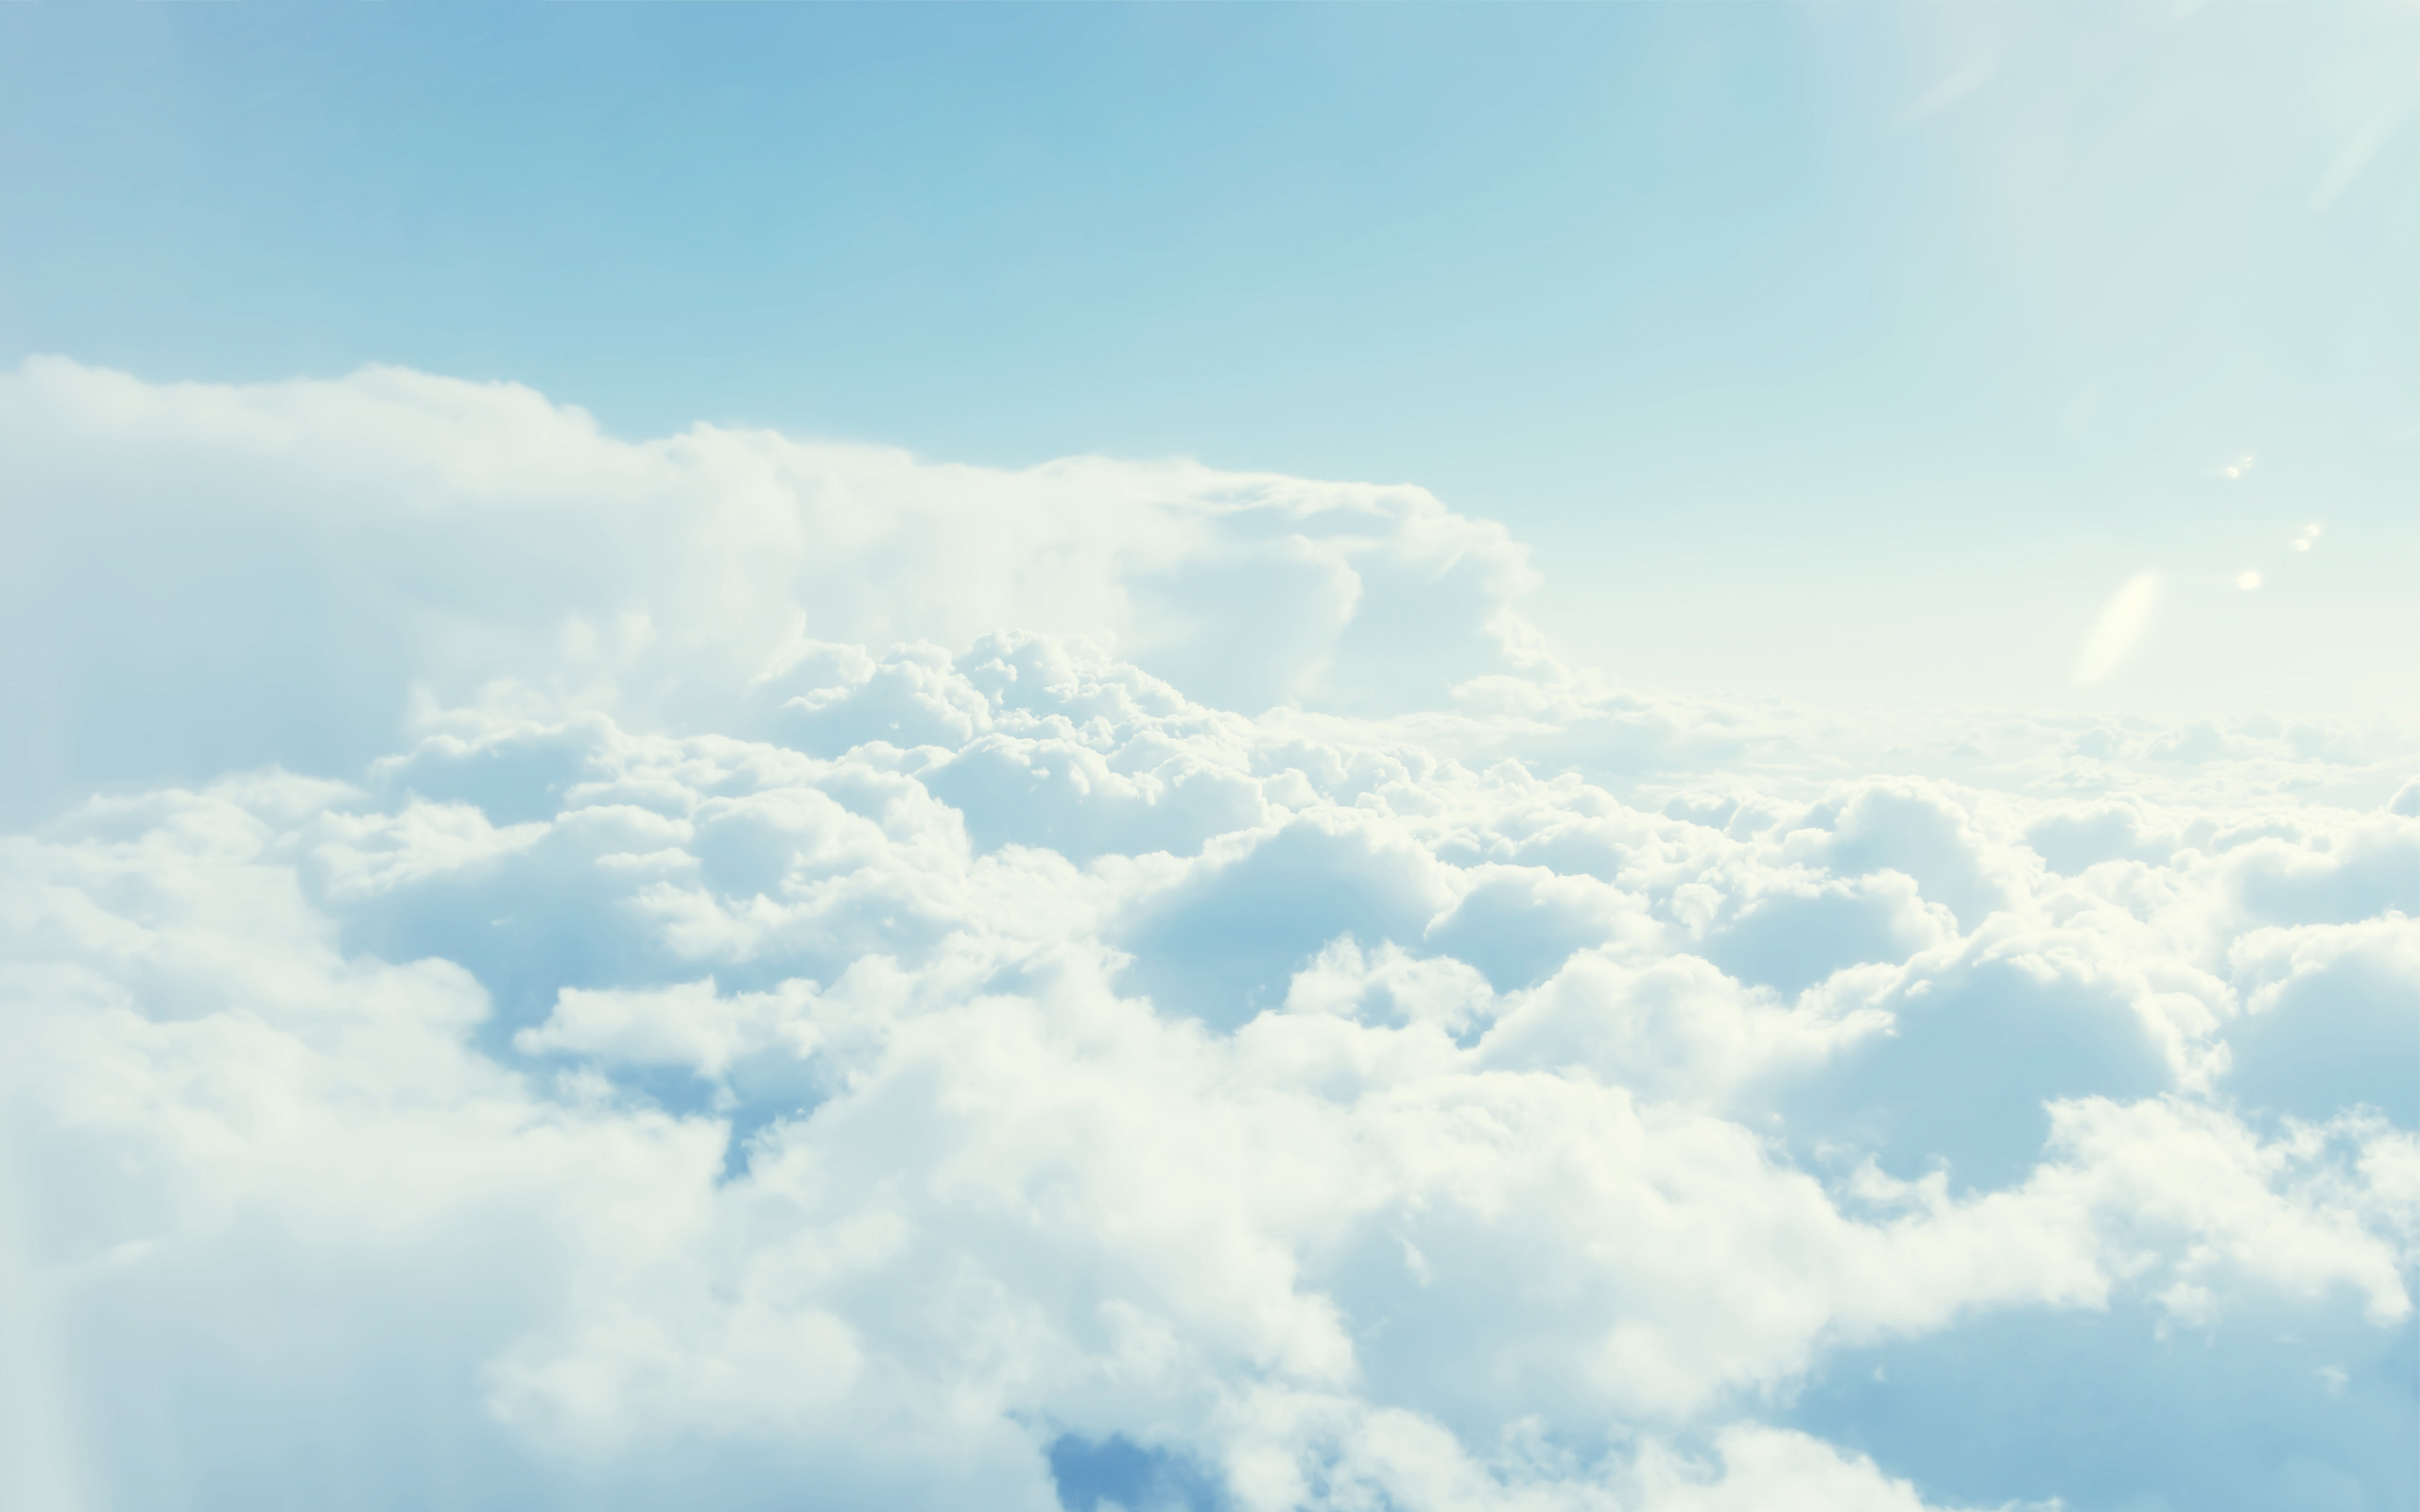 Above the Clouds wallpapers and images   wallpapers pictures photos 2560x1600